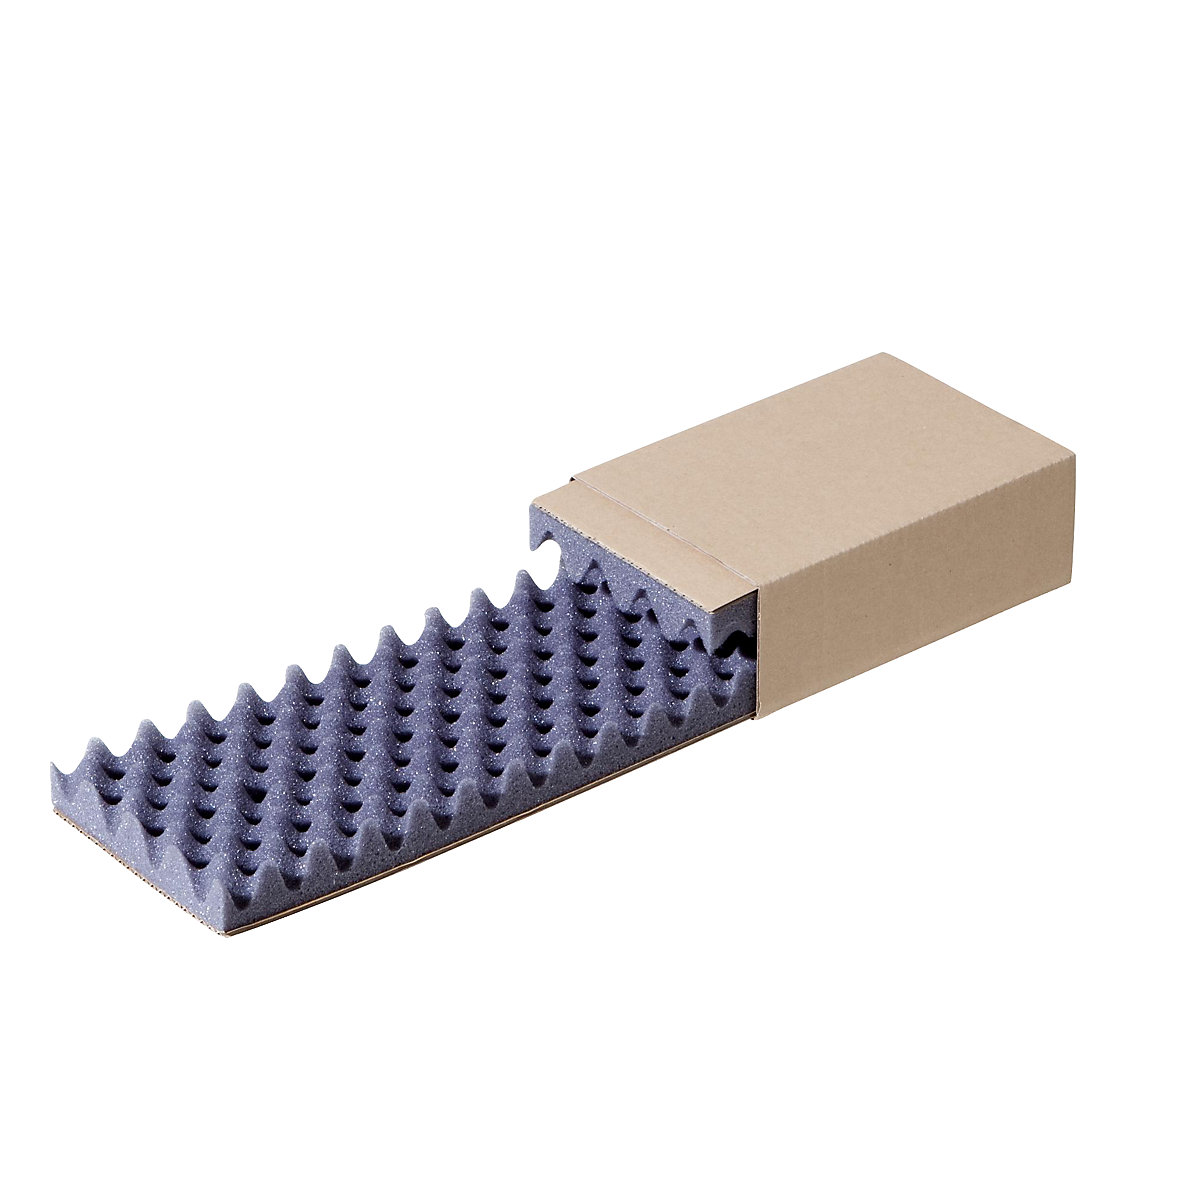 Slide boxes, internal part FEFCO 0907, external part FEFCO 0503, padded, internal dimensions 210 x 140 x 65 mm, pack of 50